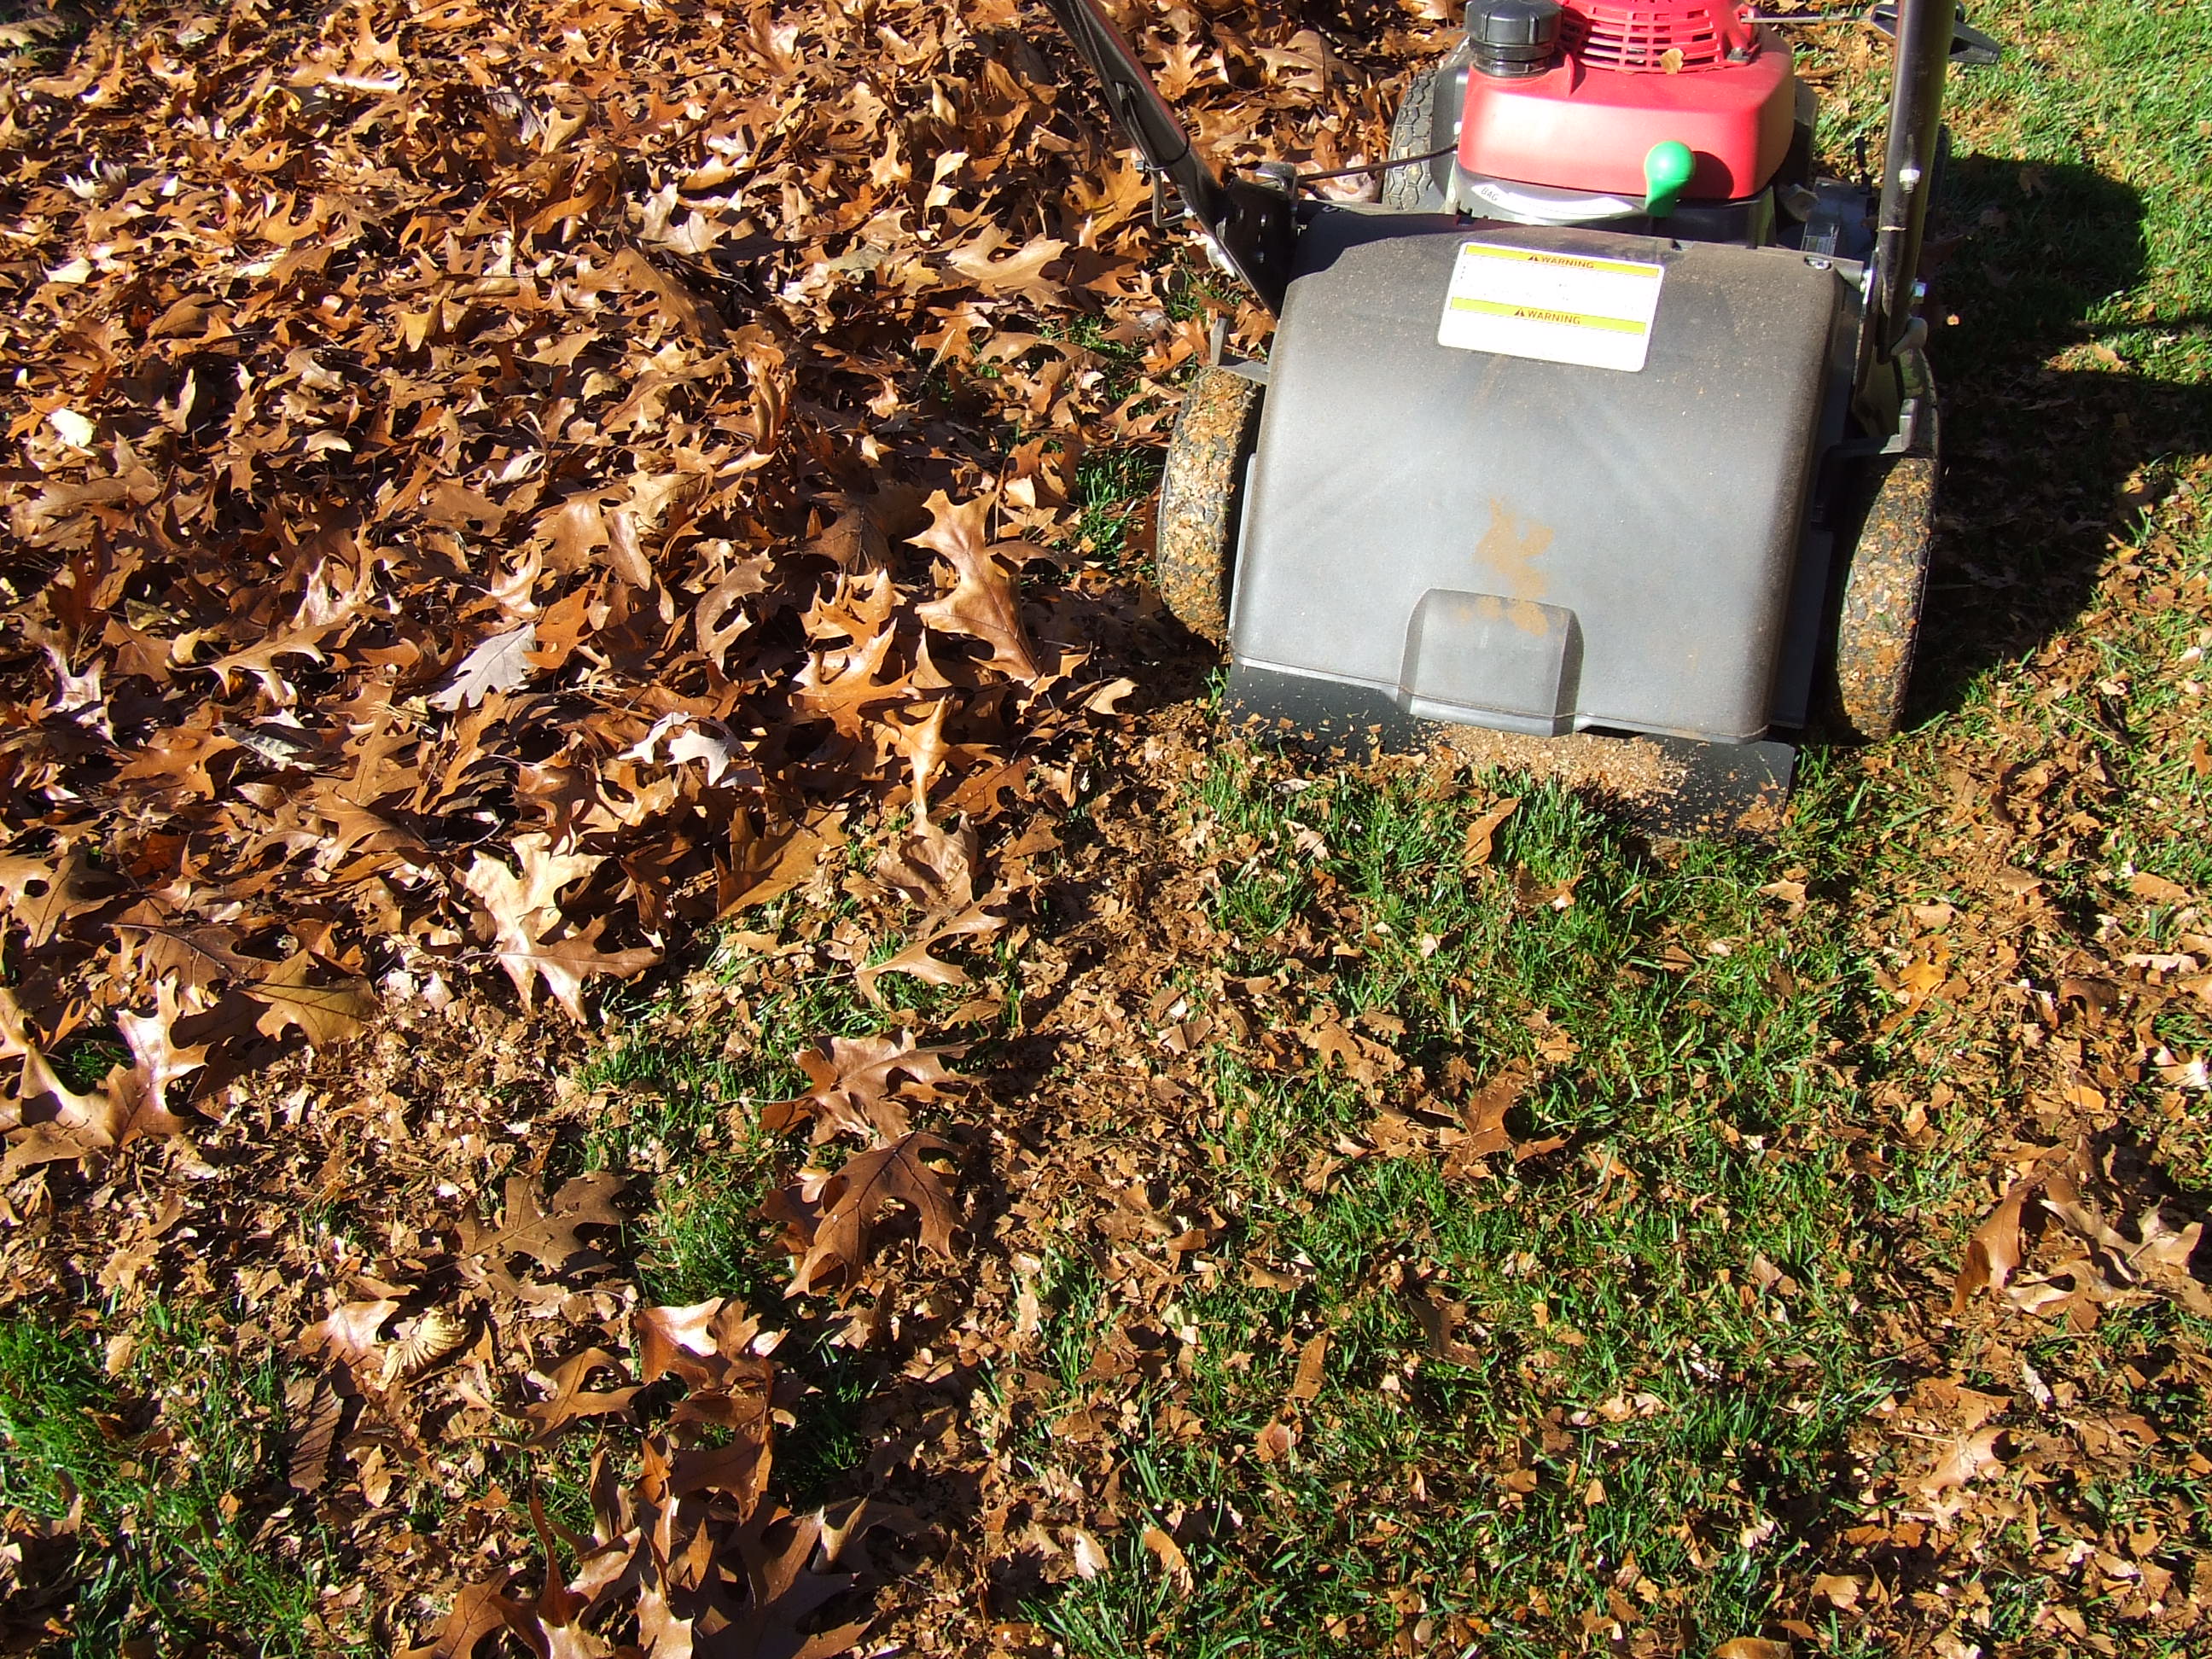 Leaf and Lawn chute to Rake and Fill Bags In One Step with Less